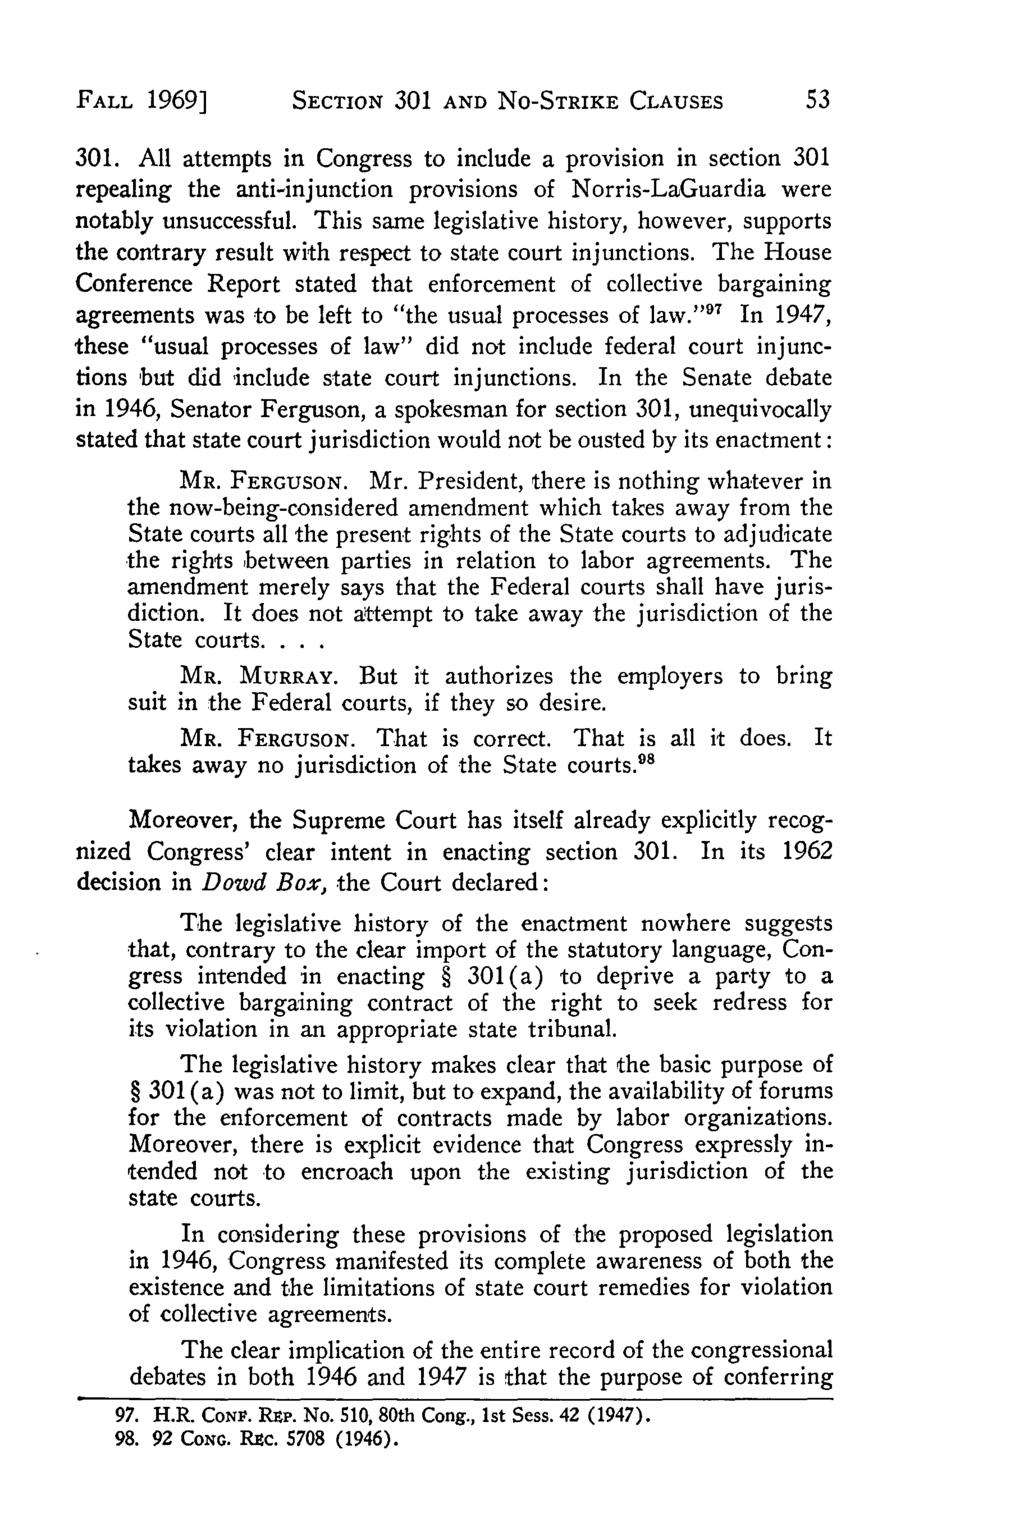 FALL 1969] Villanova Law Review, Vol. 15, Iss. 1 [1969], Art. 2 SECTION 301 AND NO-STRIKE CLAUSES 301.